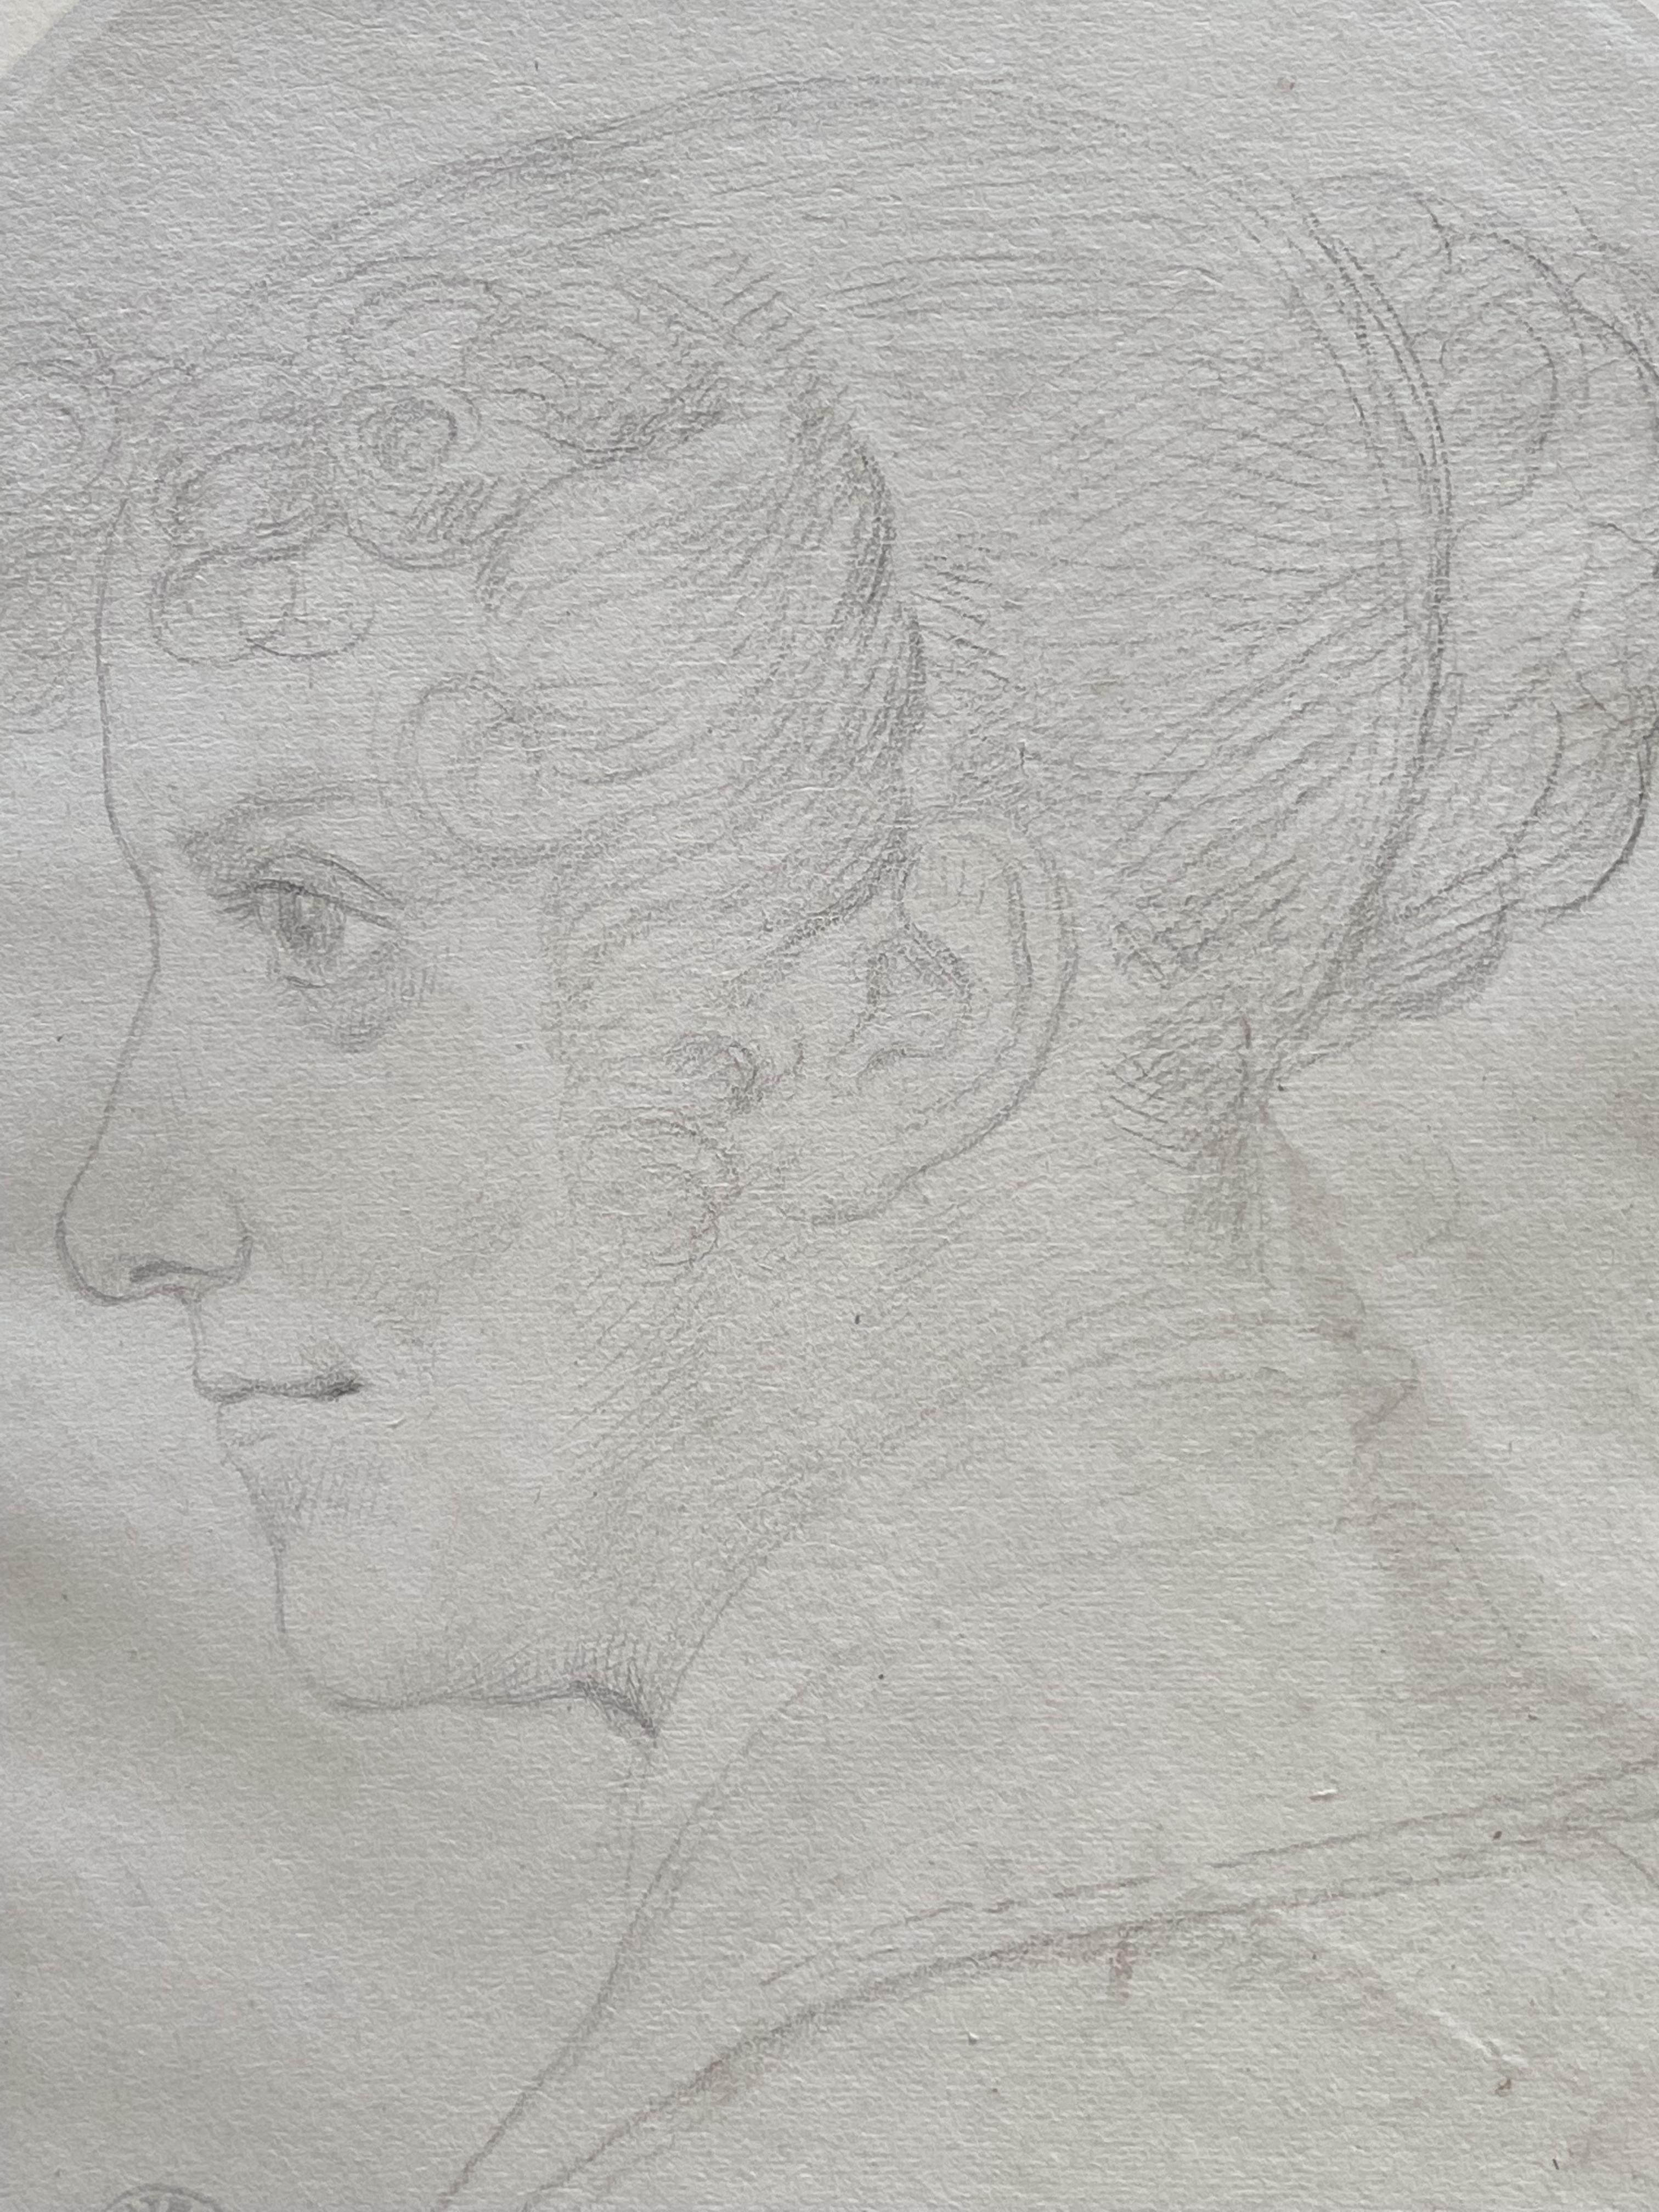 Achille Devéria (1800-1857) 
A young woman seen in profile
Black Chalk on paper
with cut edges 
Bears the stamp of the Achille Deveria Estate Sale of 1967 on the lower left 
31.5 x 24.5 cm
In its original mount : 45 x 35 cm
Not framed

This